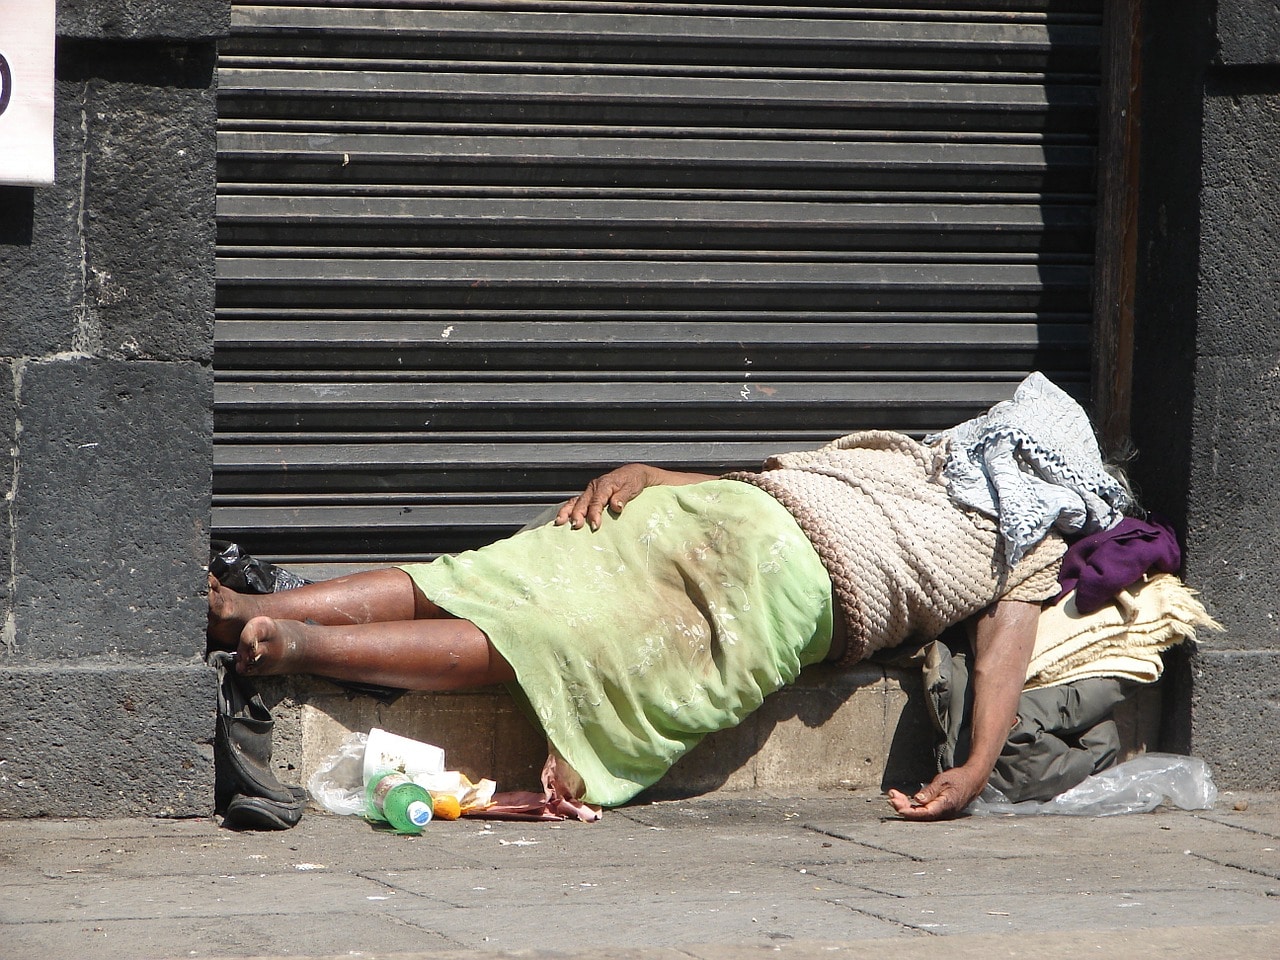 An elderly Mexican woman lying under a blanket in front of a wall in Mexico.